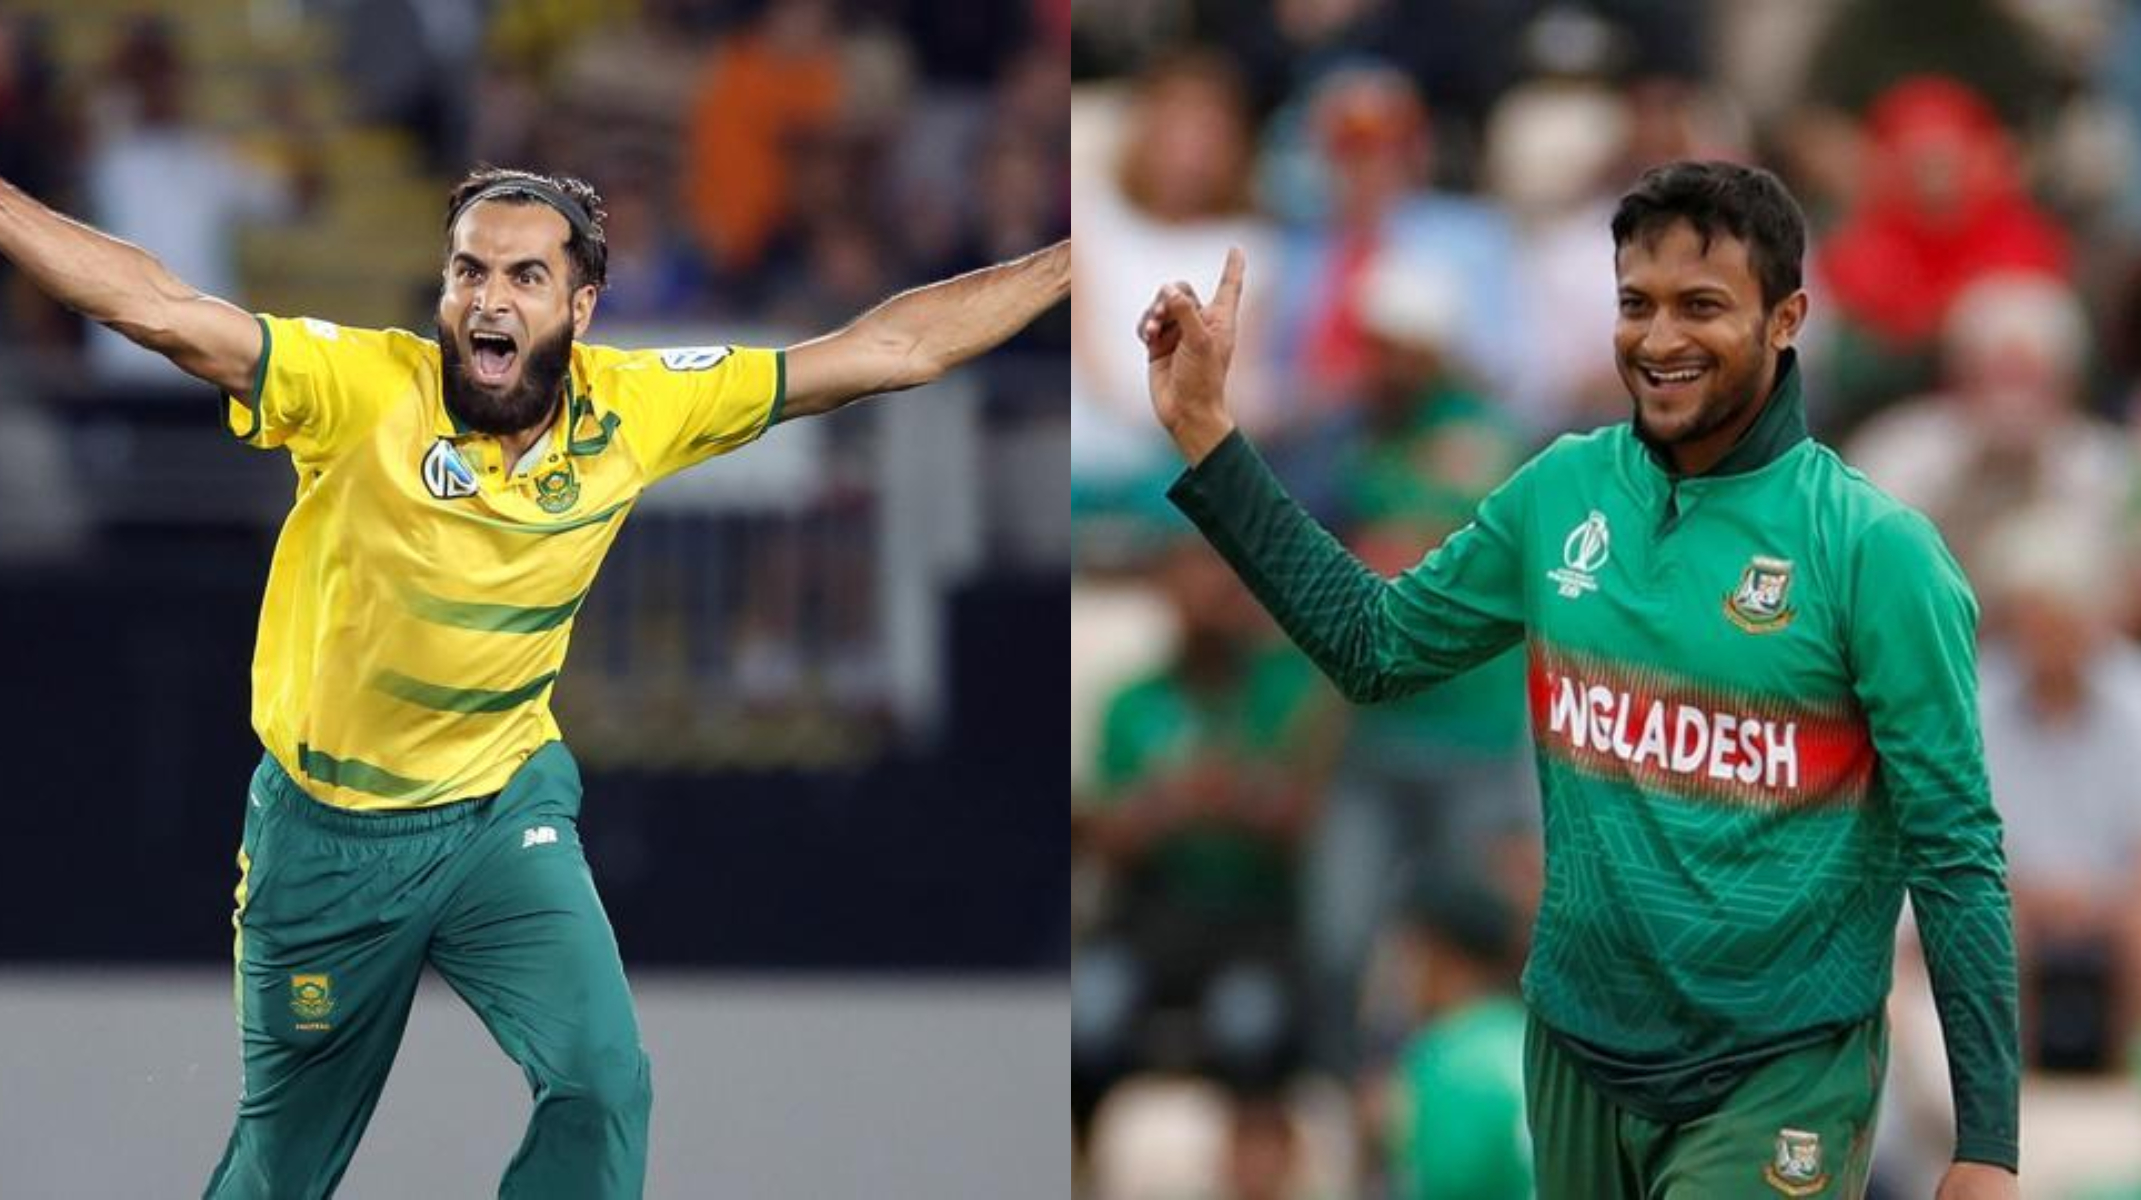 Imran Tahir and Shakib-Al Hasan can bamboozle the best of batsmen on any pitch | Getty